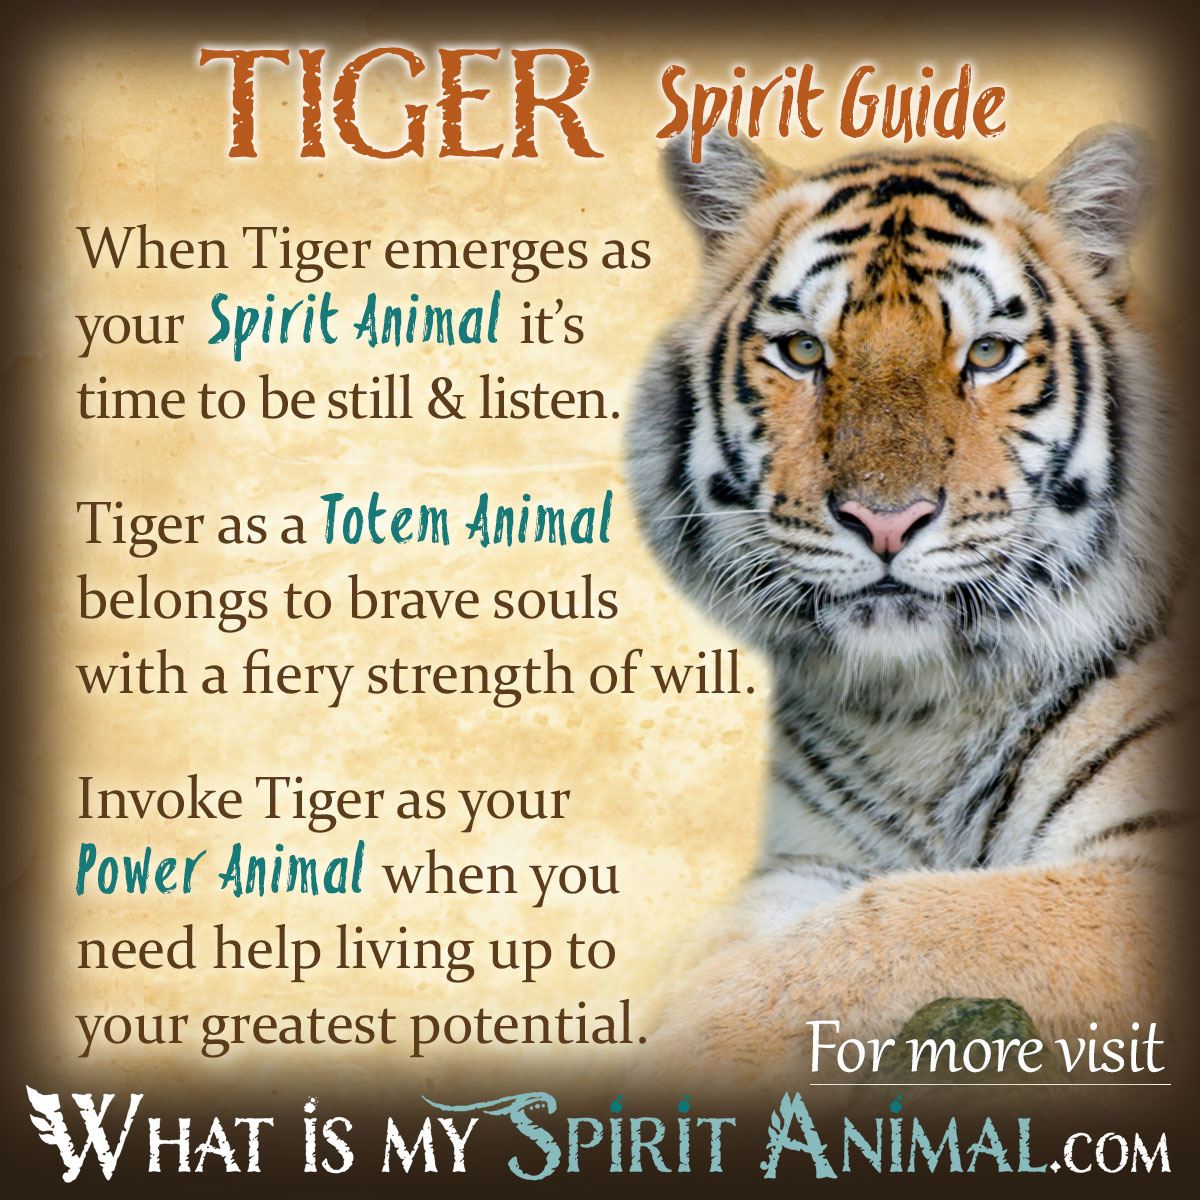 What is the literal meaning of tiger?